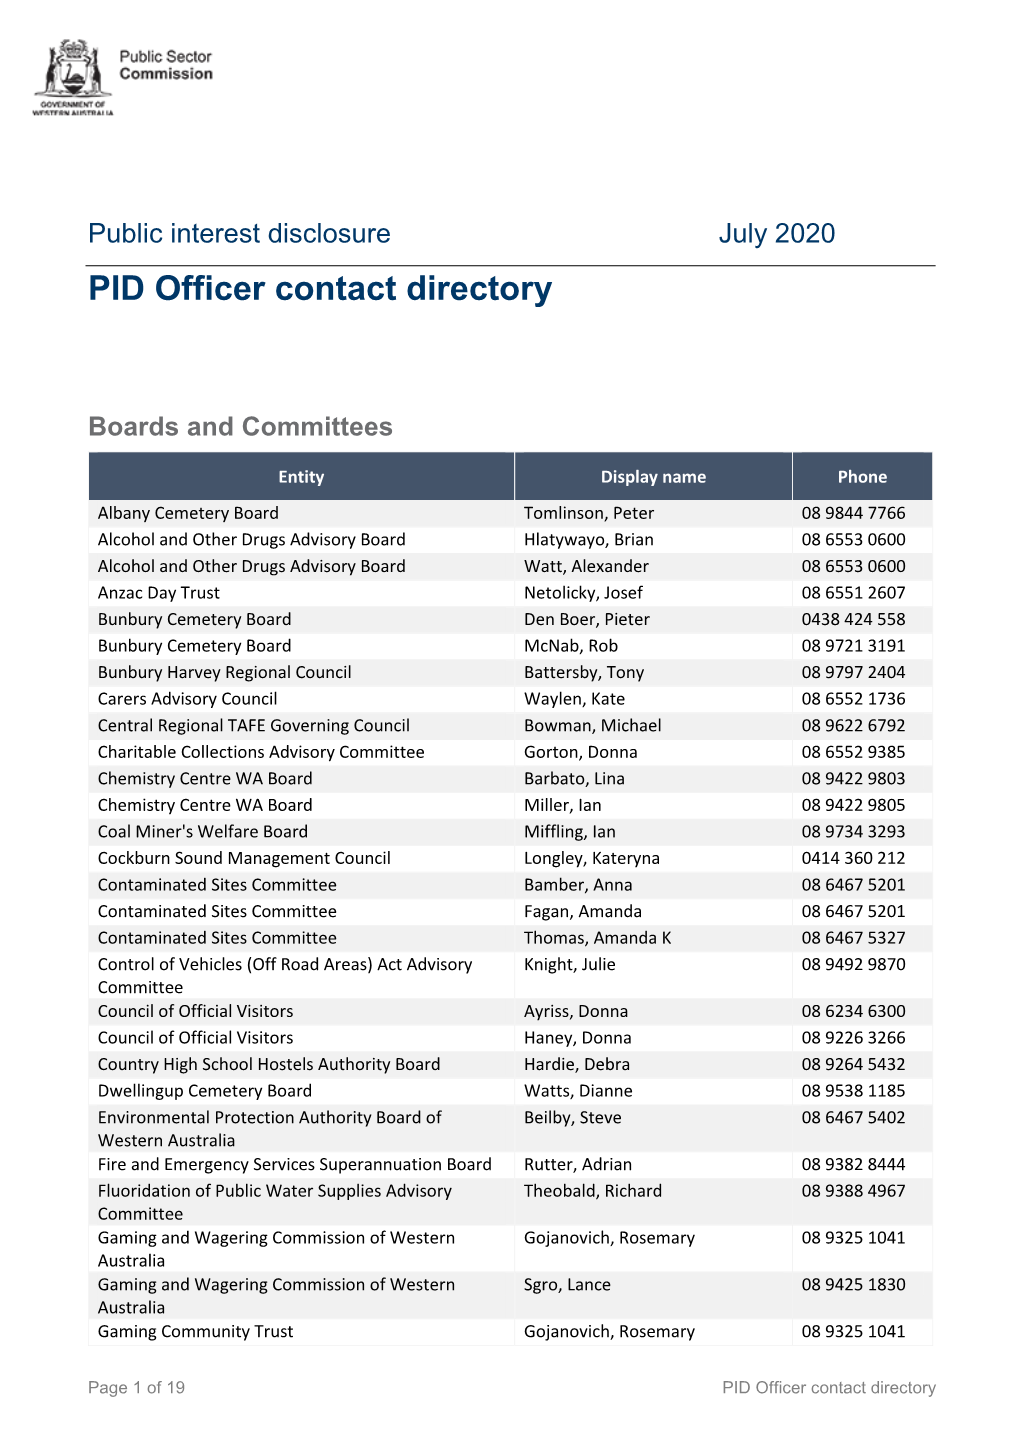 PID Officer Contact Directory